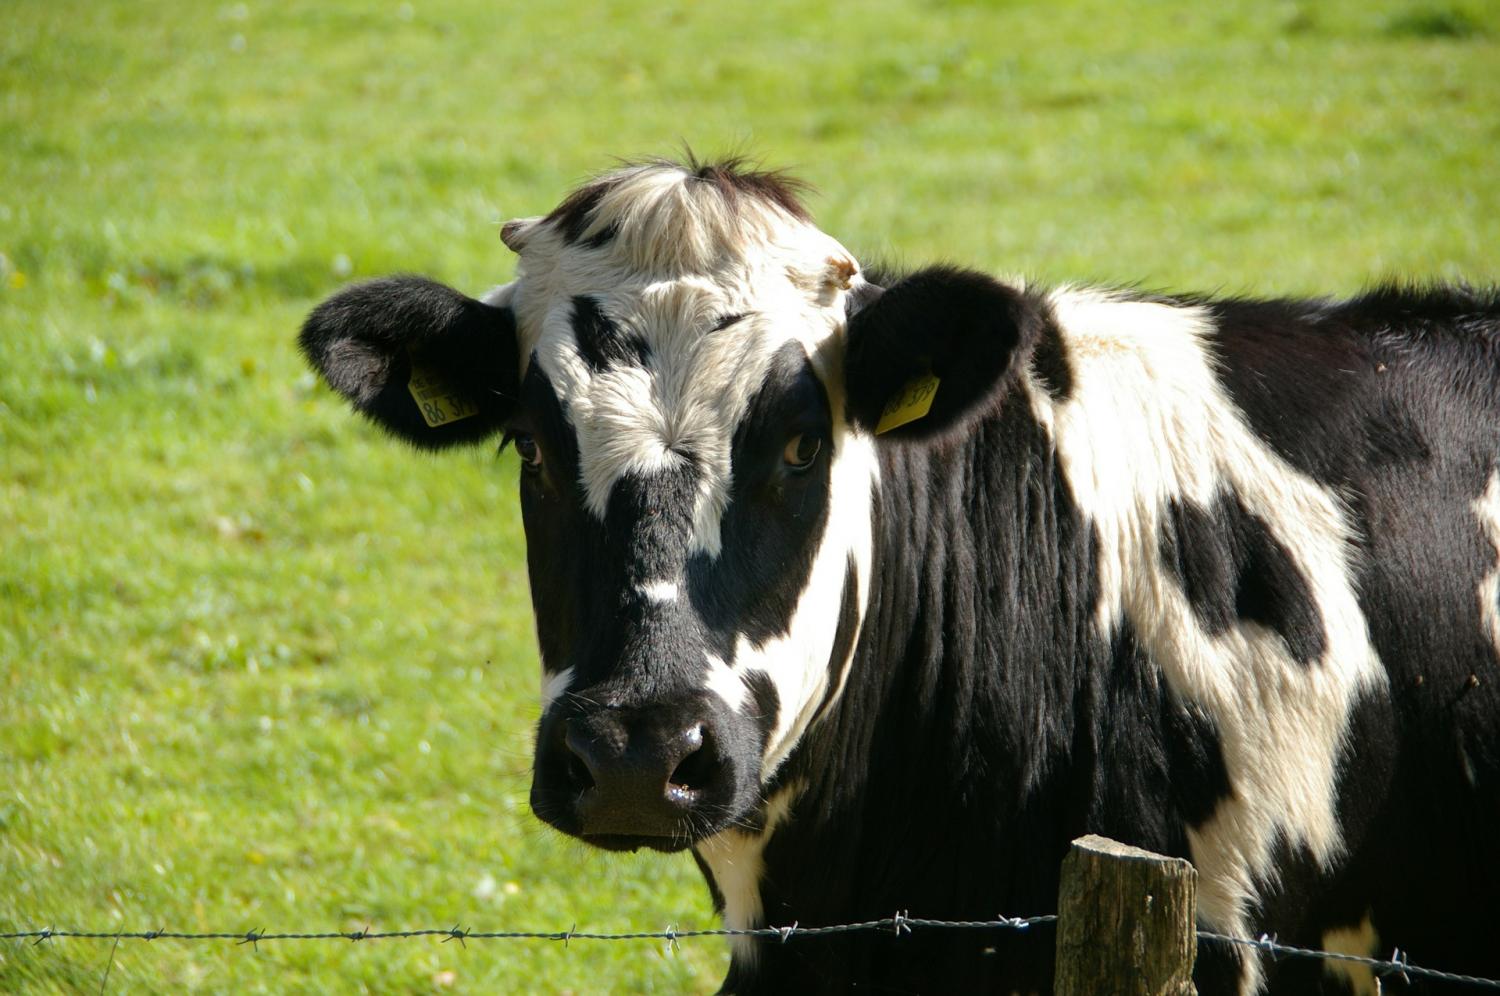 #A nutrition solution can help heat-stressed cows as US warms